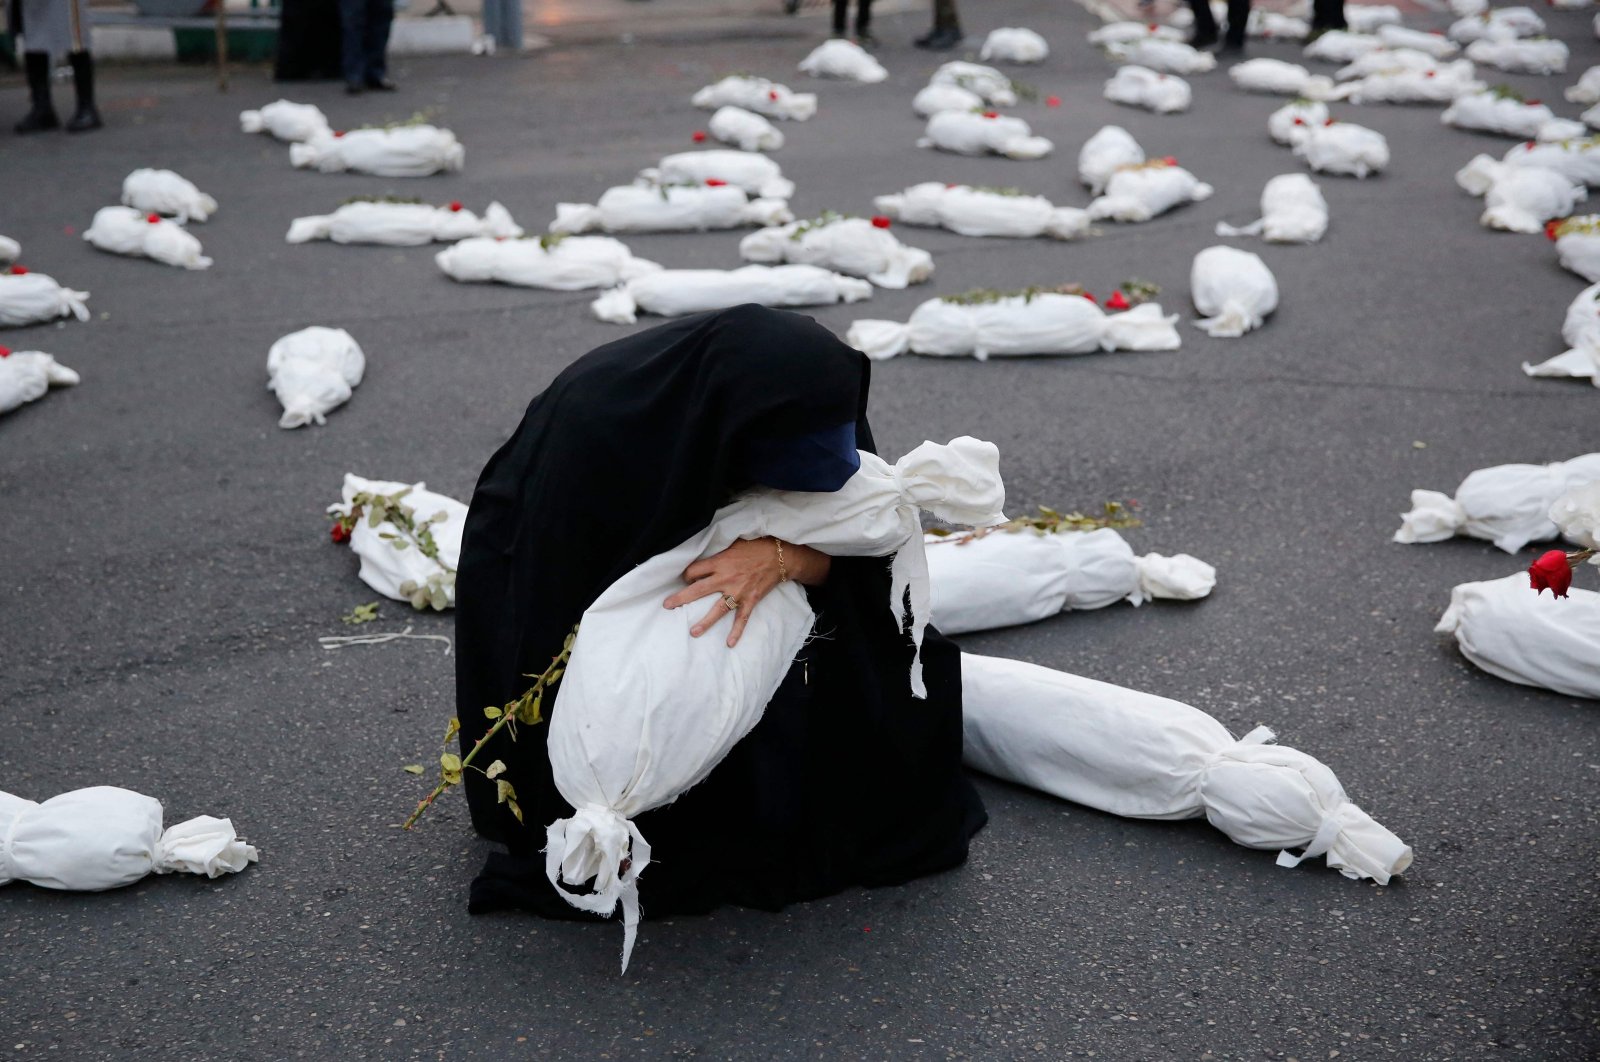 A woman takes part in an installation featuring mock shrouded bodies of children in Palestine square in support of Palestinians, Tehran, Iran, Nov. 13, 2023. (AFP Photo)